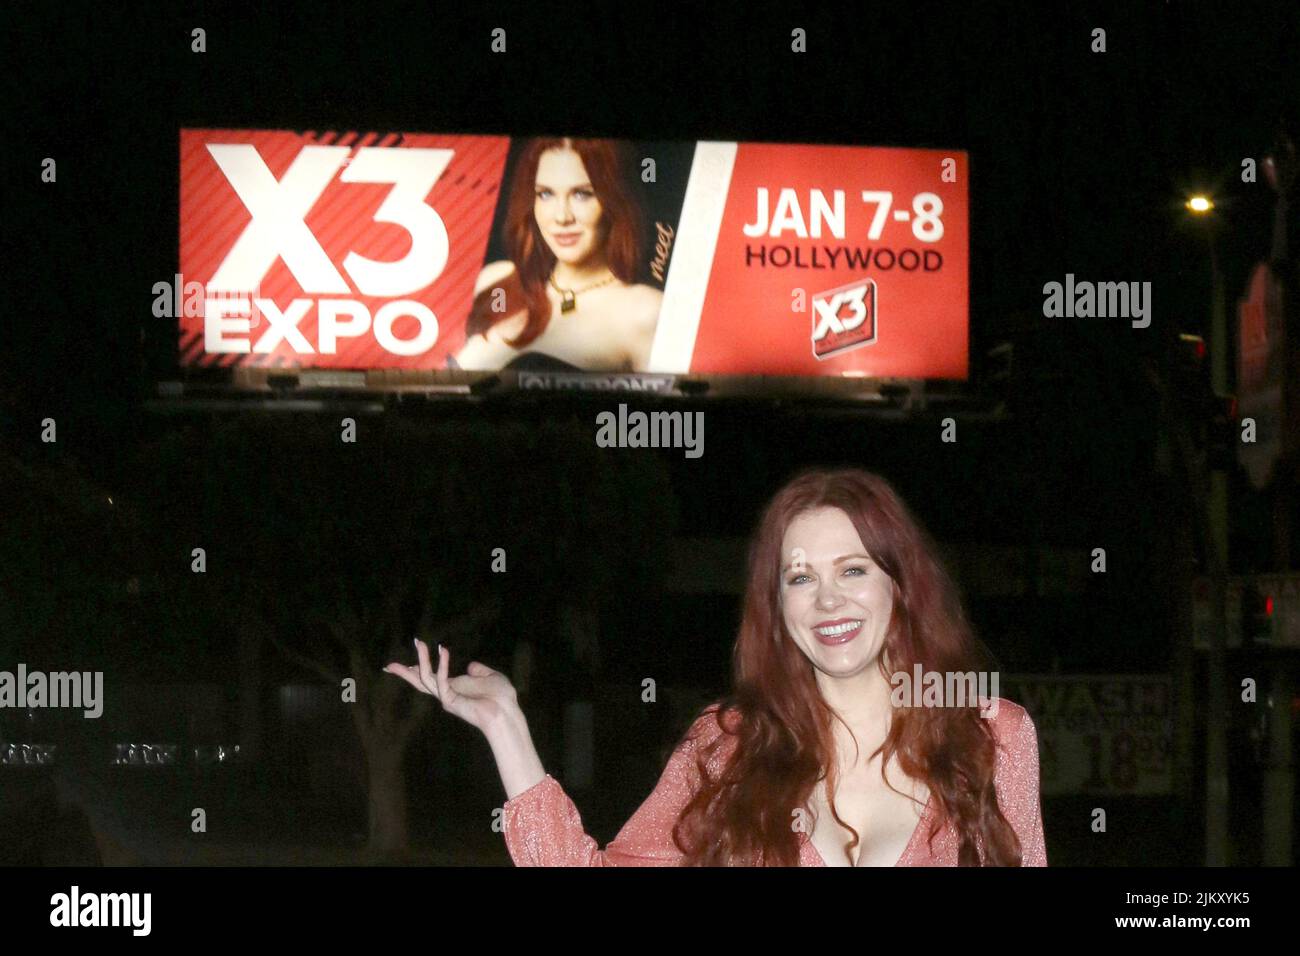 Maitland Ward Promotes appearance at X3 Expo at Hollywood and Vermont on December 28, 2021 in Los Angeles, CA Featuring: Maitland Ward Where: Los Angeles, California, United States When: 29 Dec 2021 Credit: Nicky Nelson/WENN Stock Photo